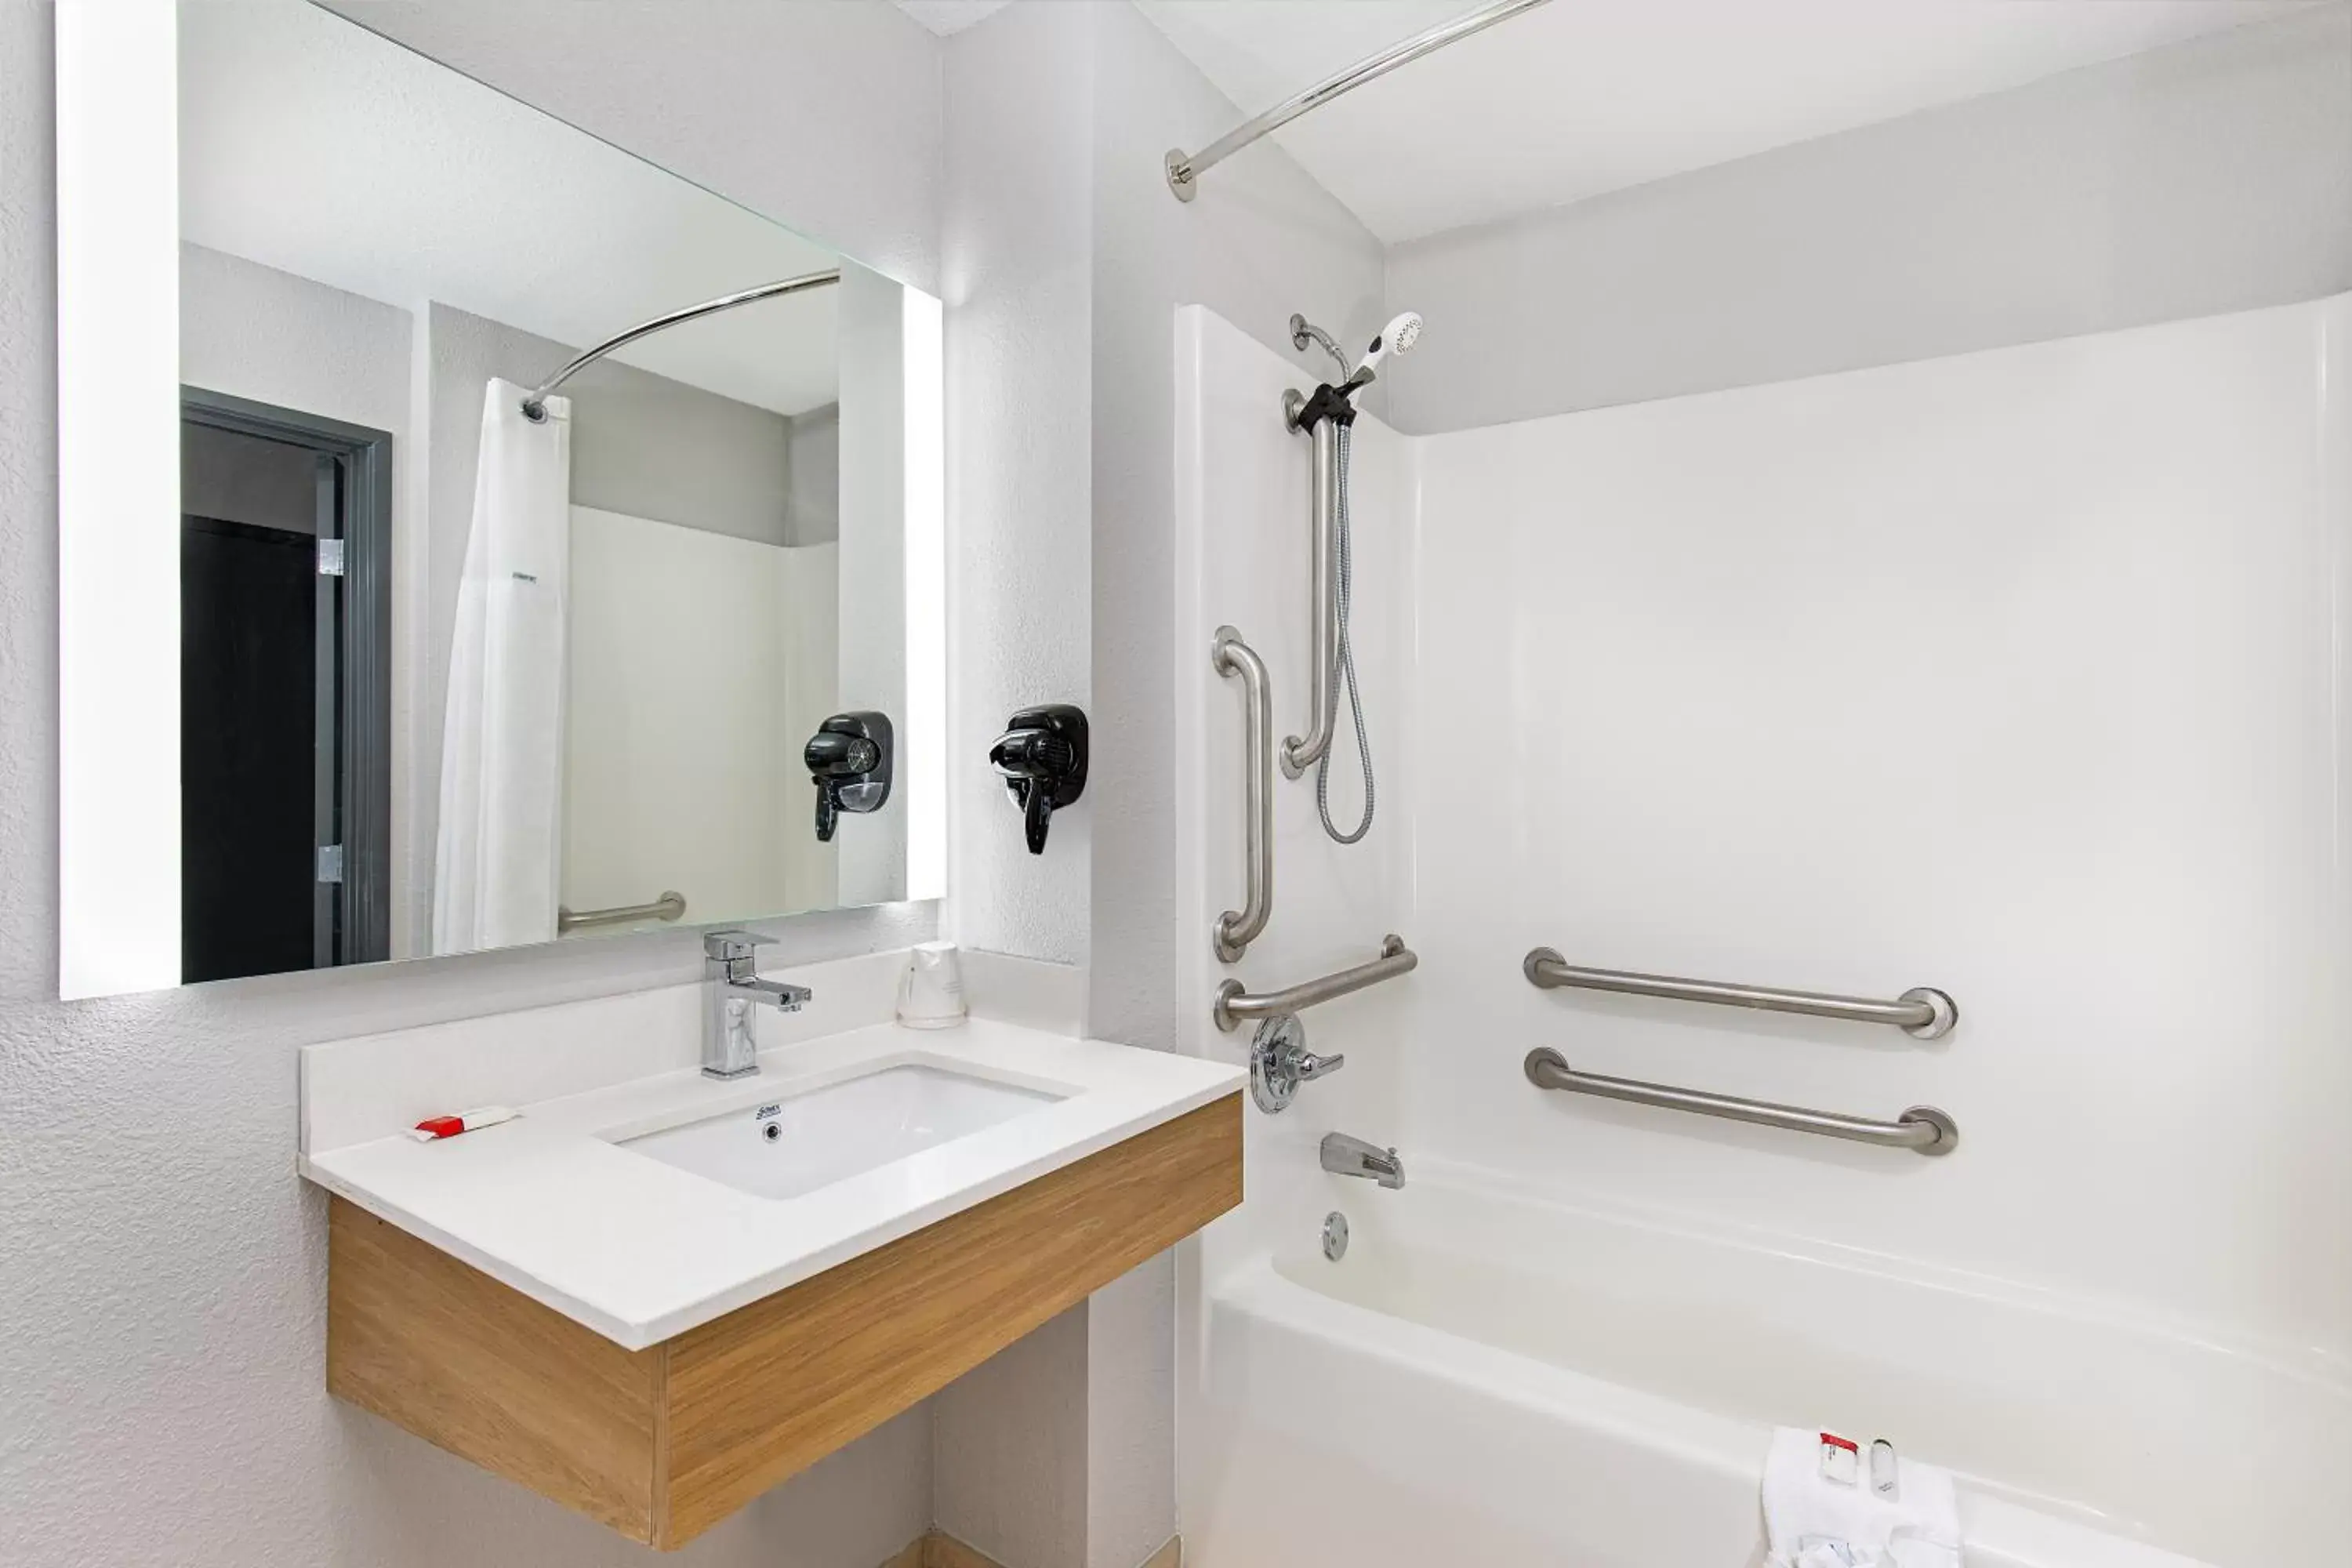 Bathroom in Microtel Inn & Suites by Wyndham Manchester - Newly Renovated